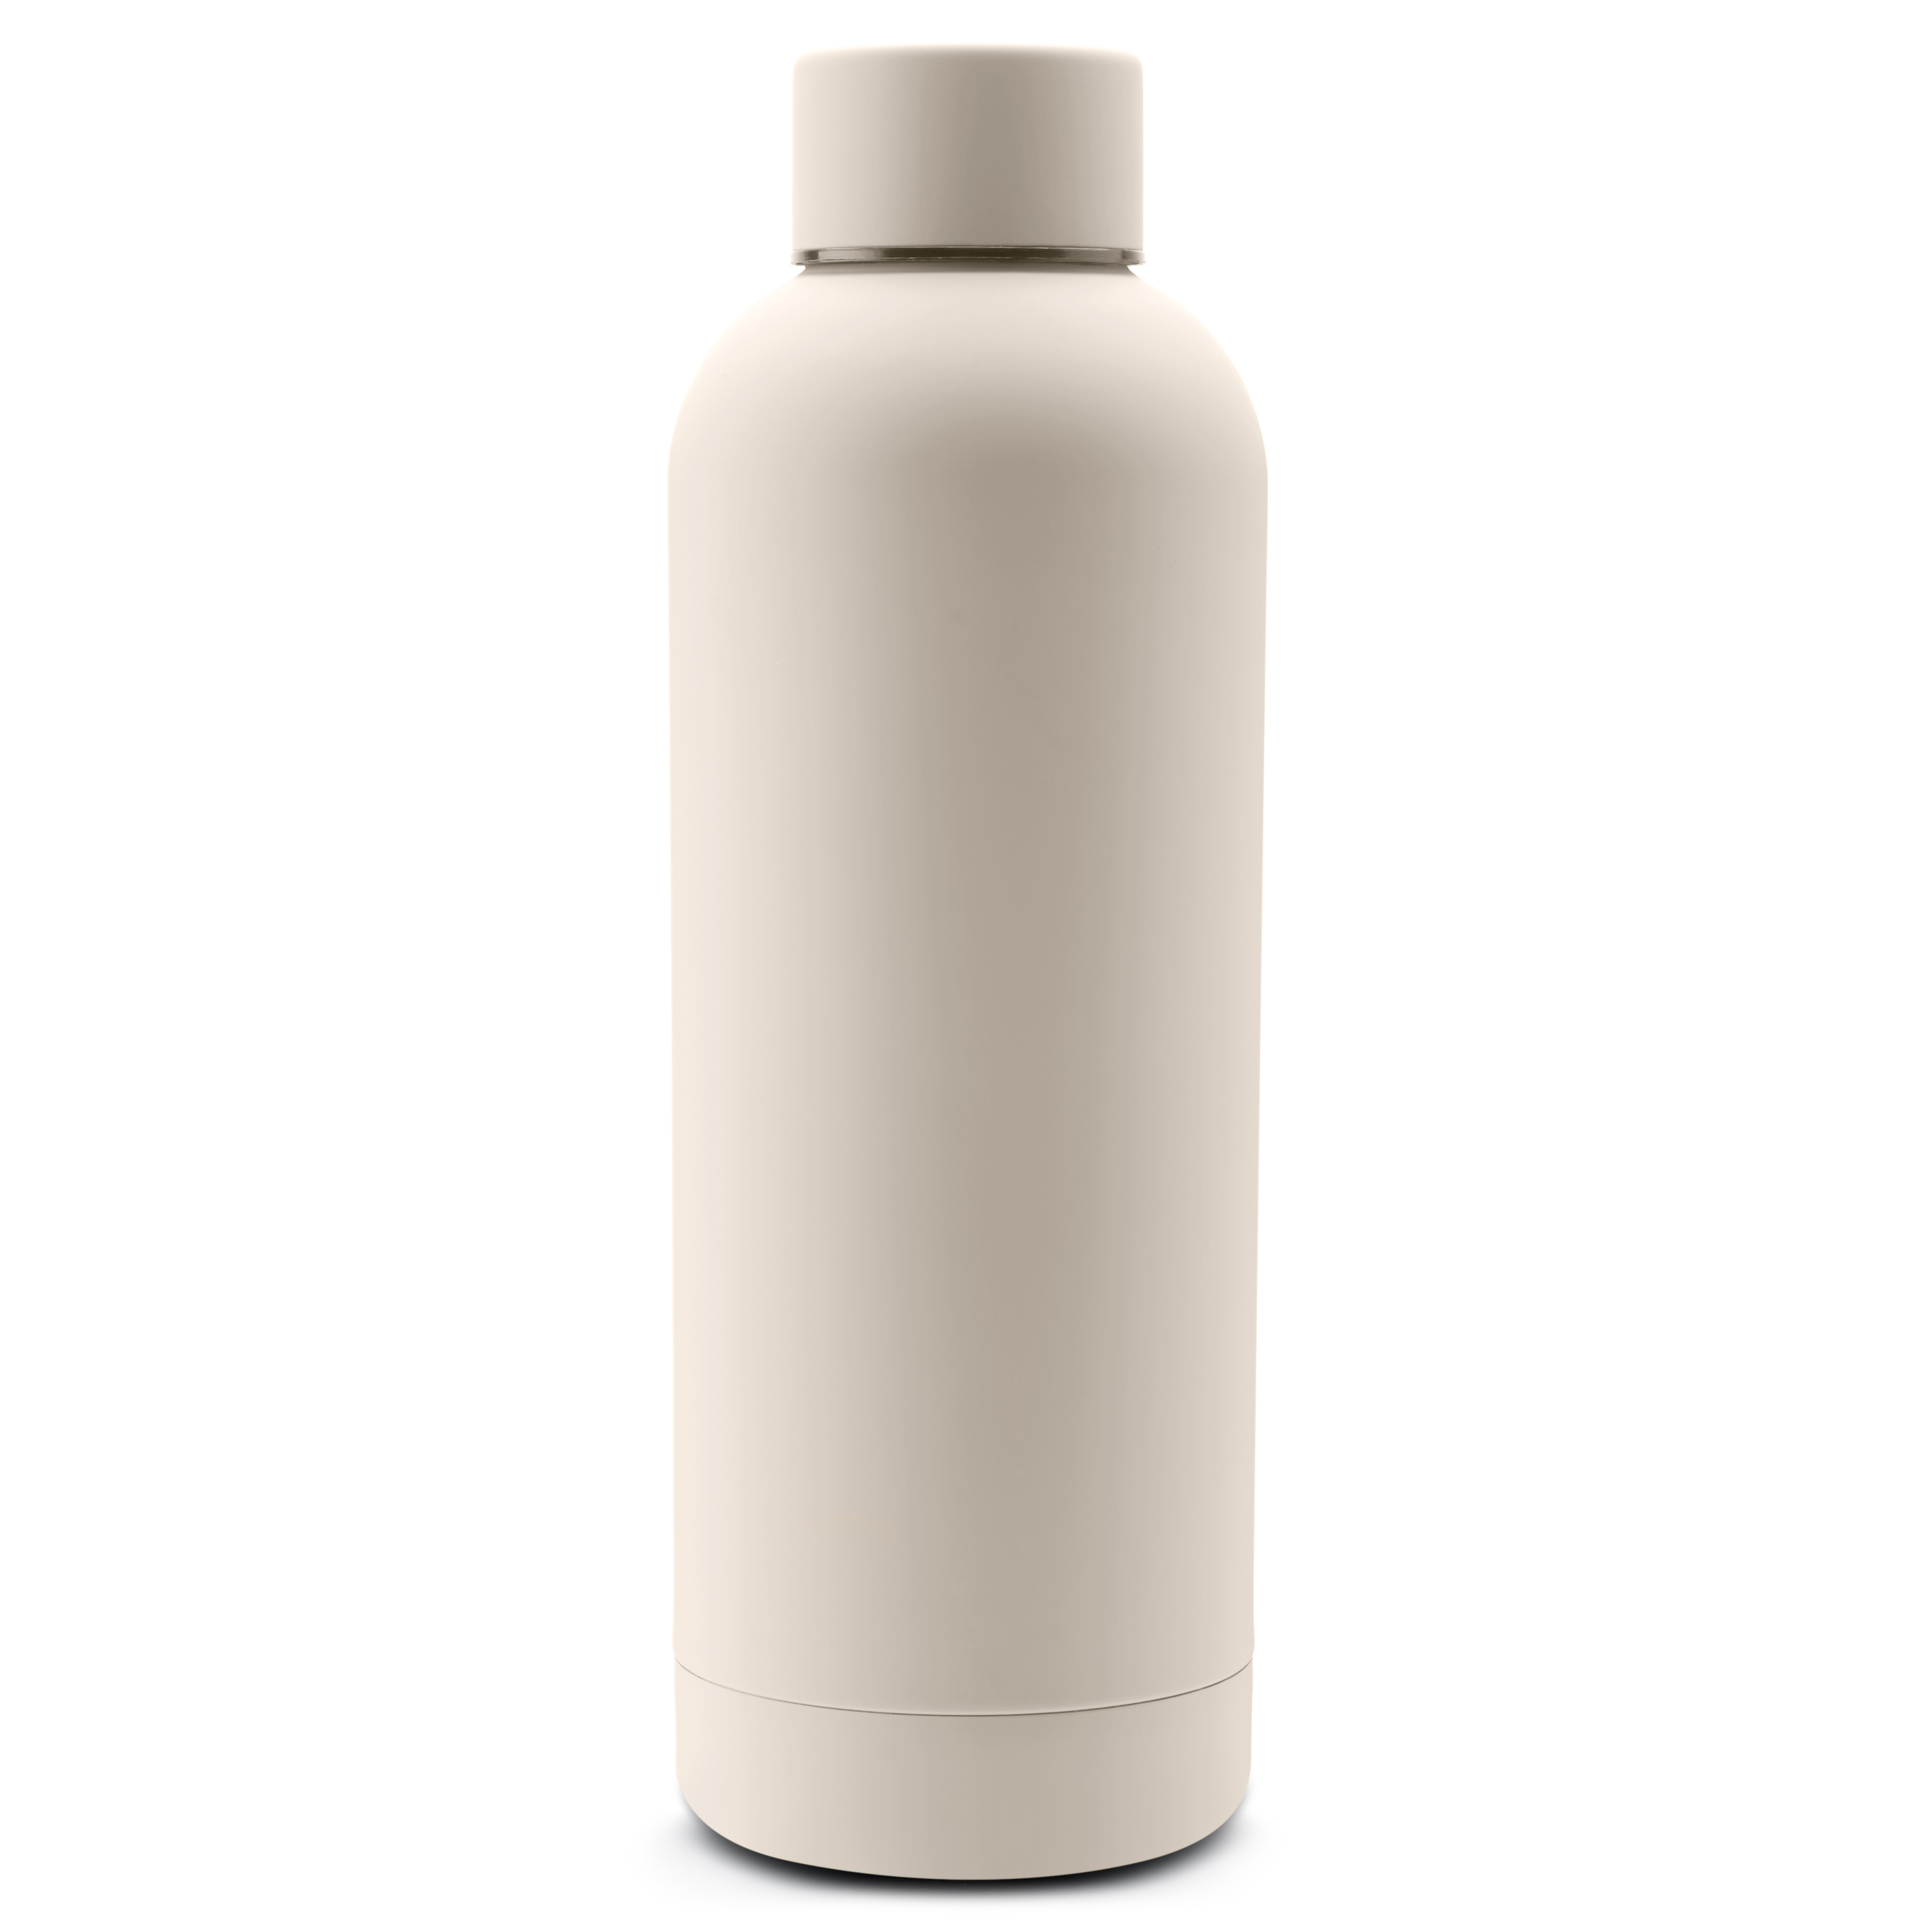 Stainless 17 FL Oz custom water bottle with an inspirational